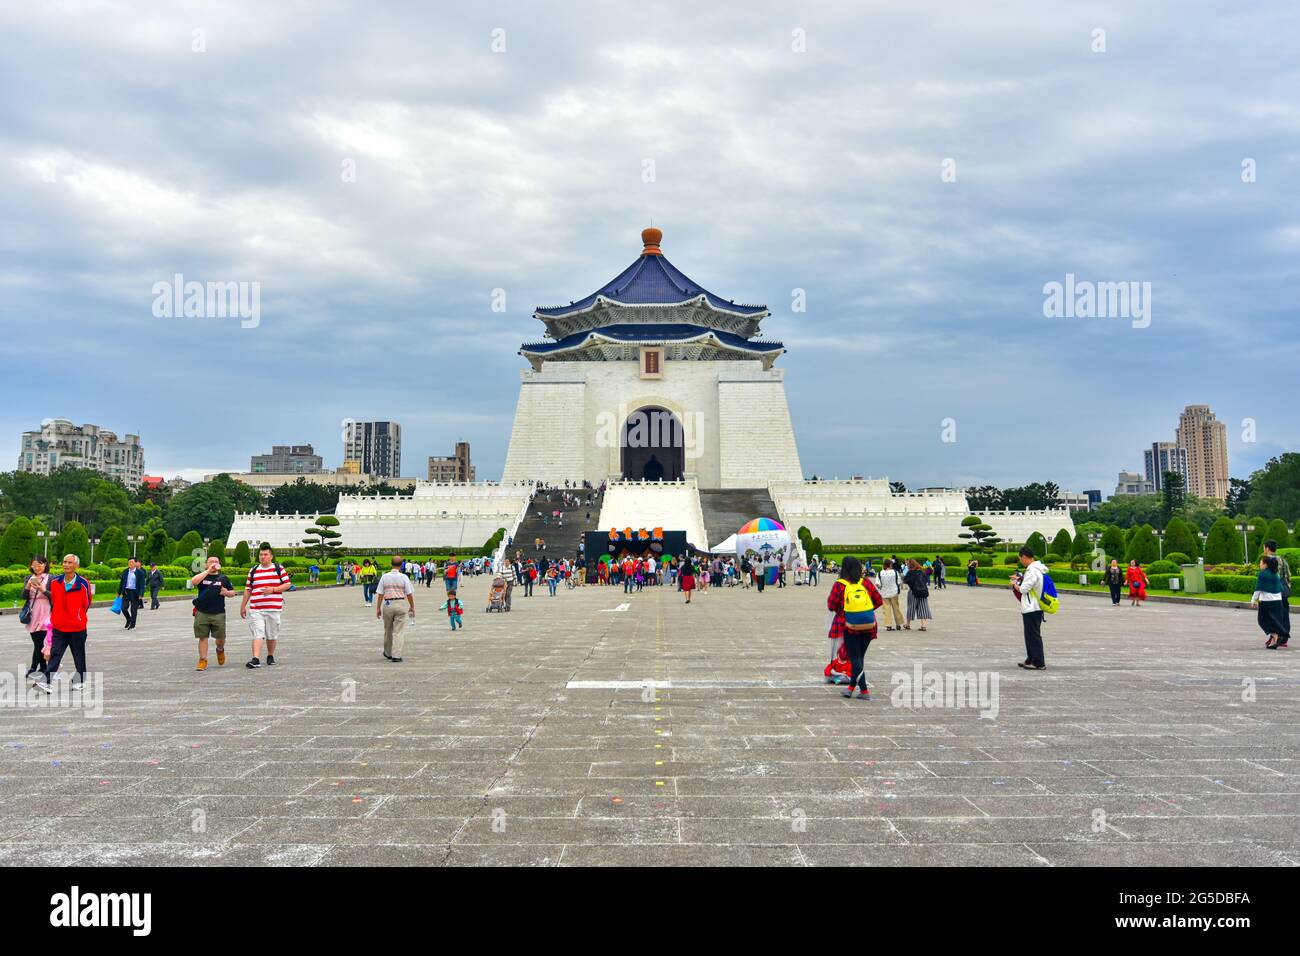 Taipei, Taiwan – May 4, 2019 : Tourists and locals visiting Kai-shek Memorial Hall. A famous landmark and must see attraction in Taipei Stock Photo